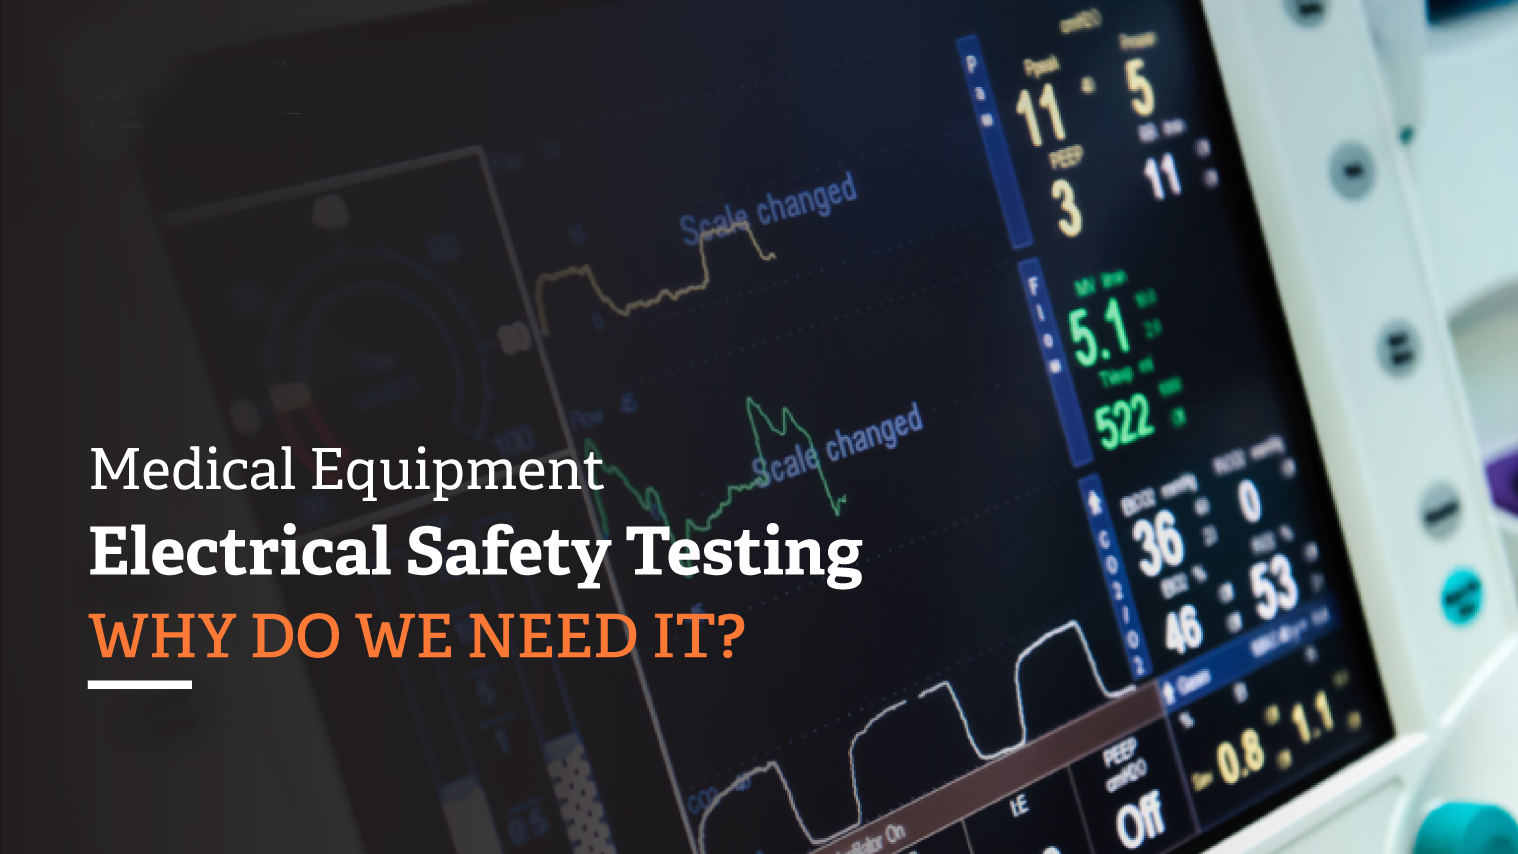 Medical Equipment Electrical Safety Testing, Why do We Need it?